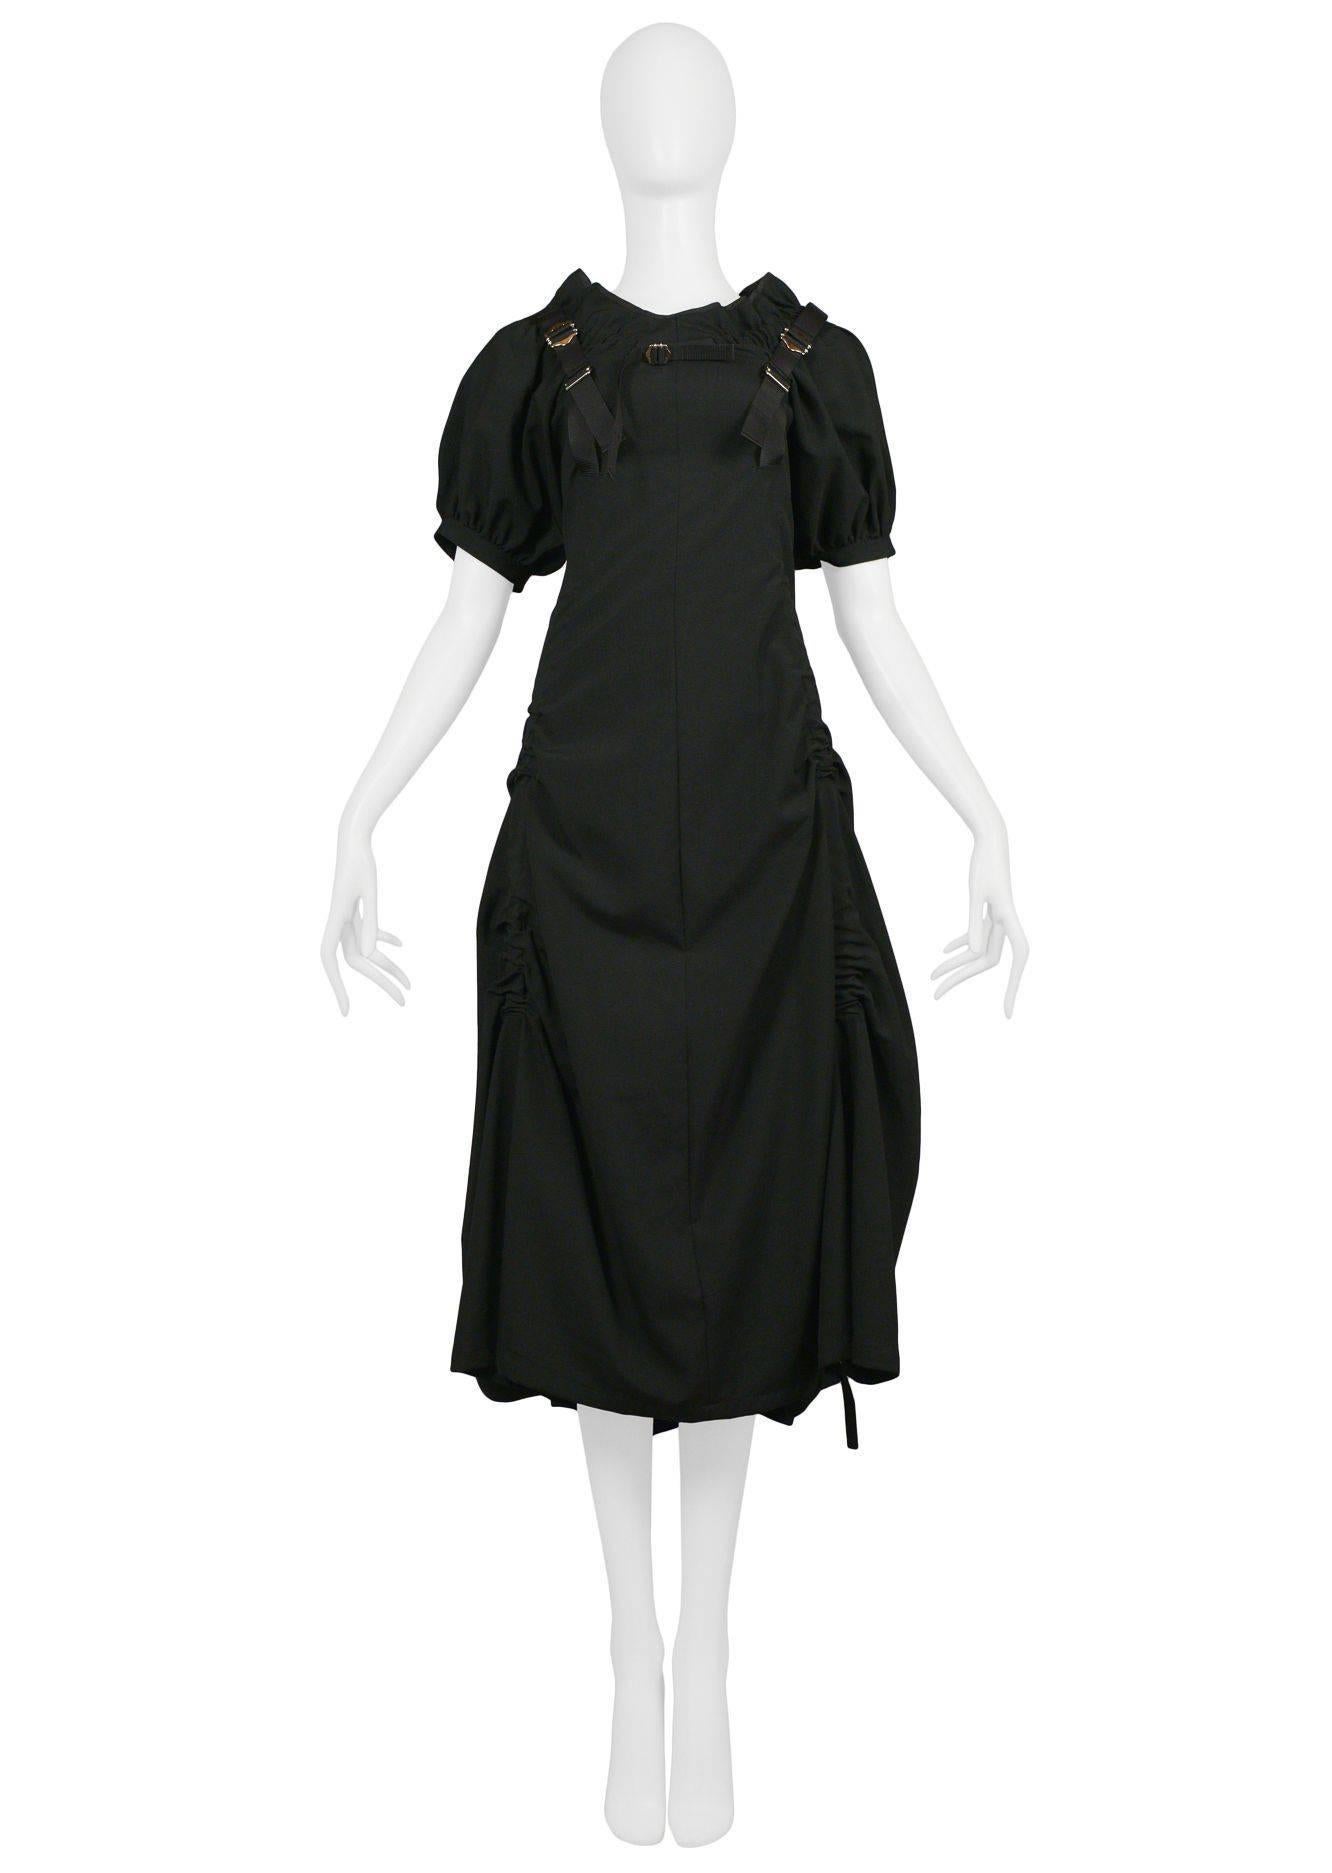 Vintage Junya Watanabe for Comme des Garcons black parachute dress featuring a keyhole open back with black straps and hardware. Collection SS 2003.